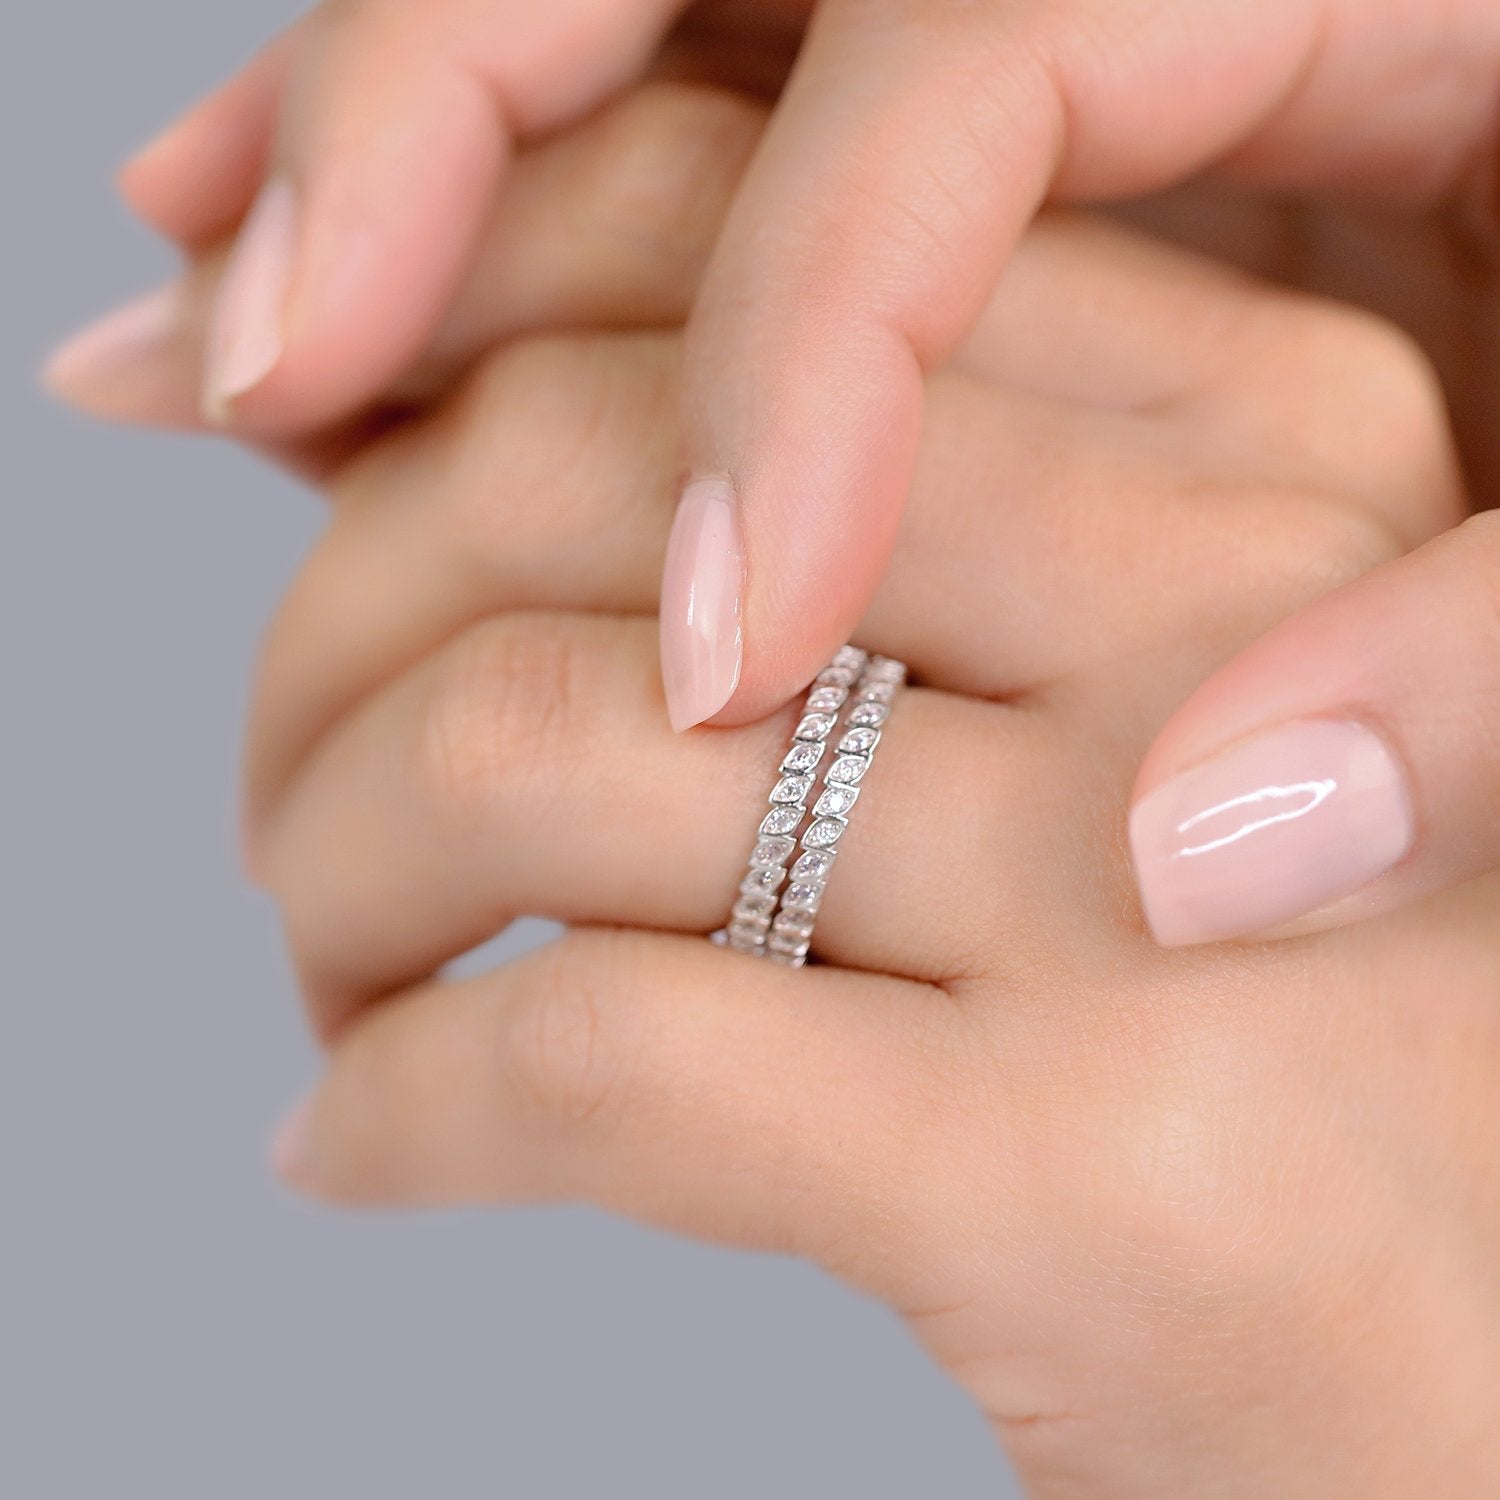 PAIR OF DAINTY ETERNITY BANDS - Trove & Co.